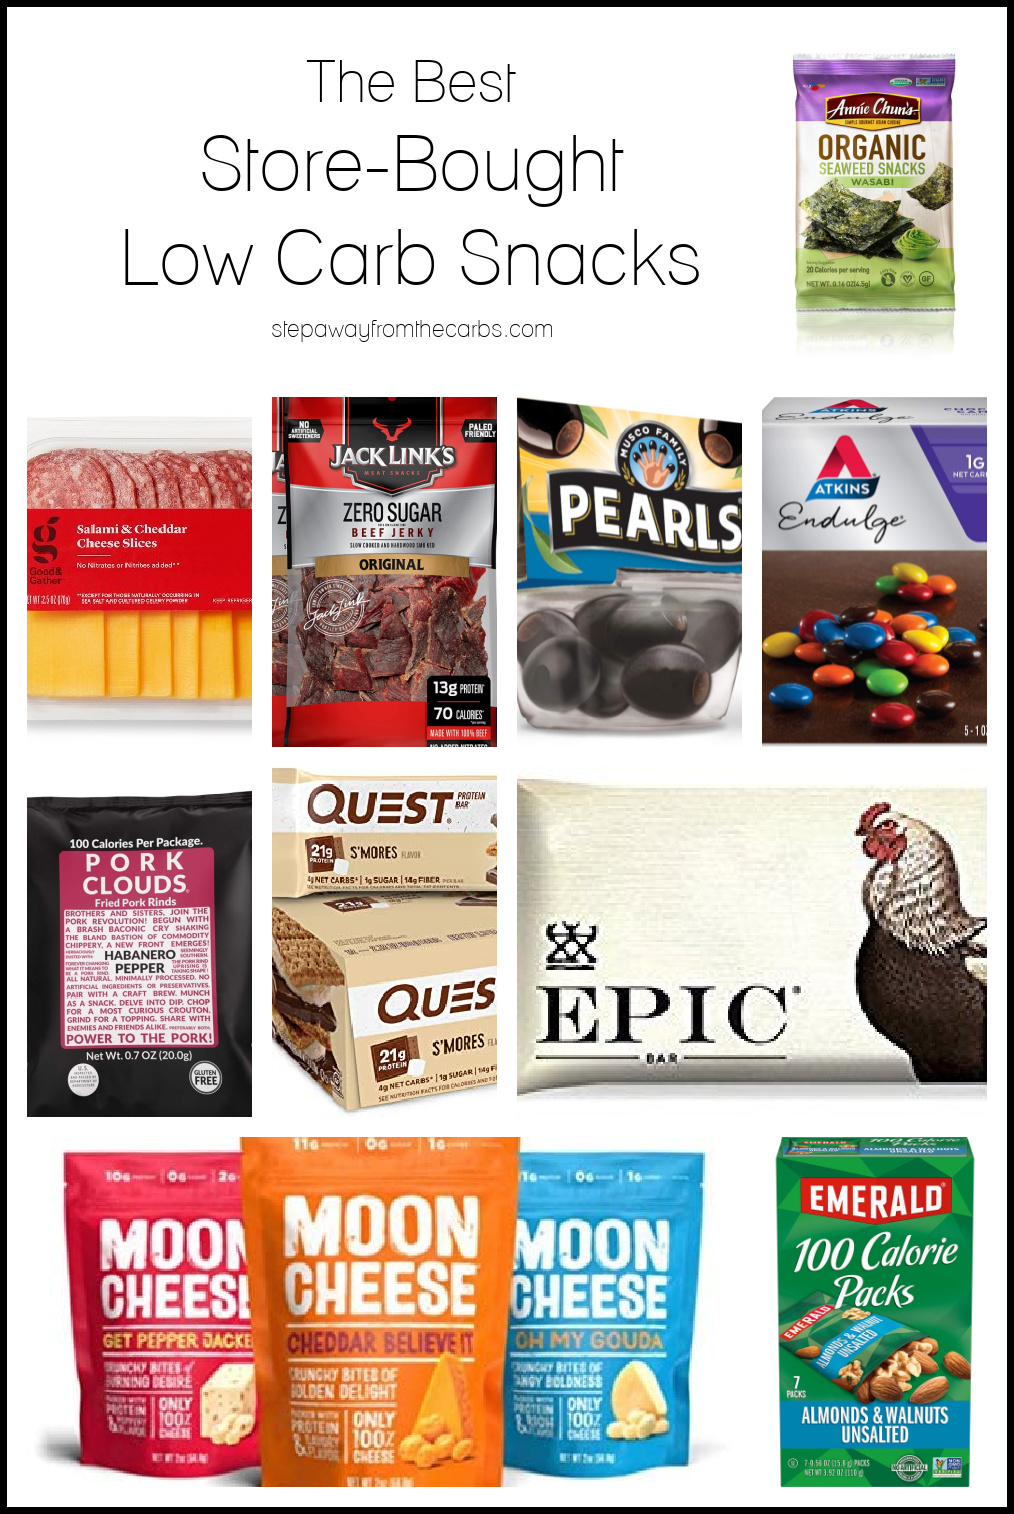 The Best Store-Bought Low Carb Snacks - all keto-friendly and sugar free!